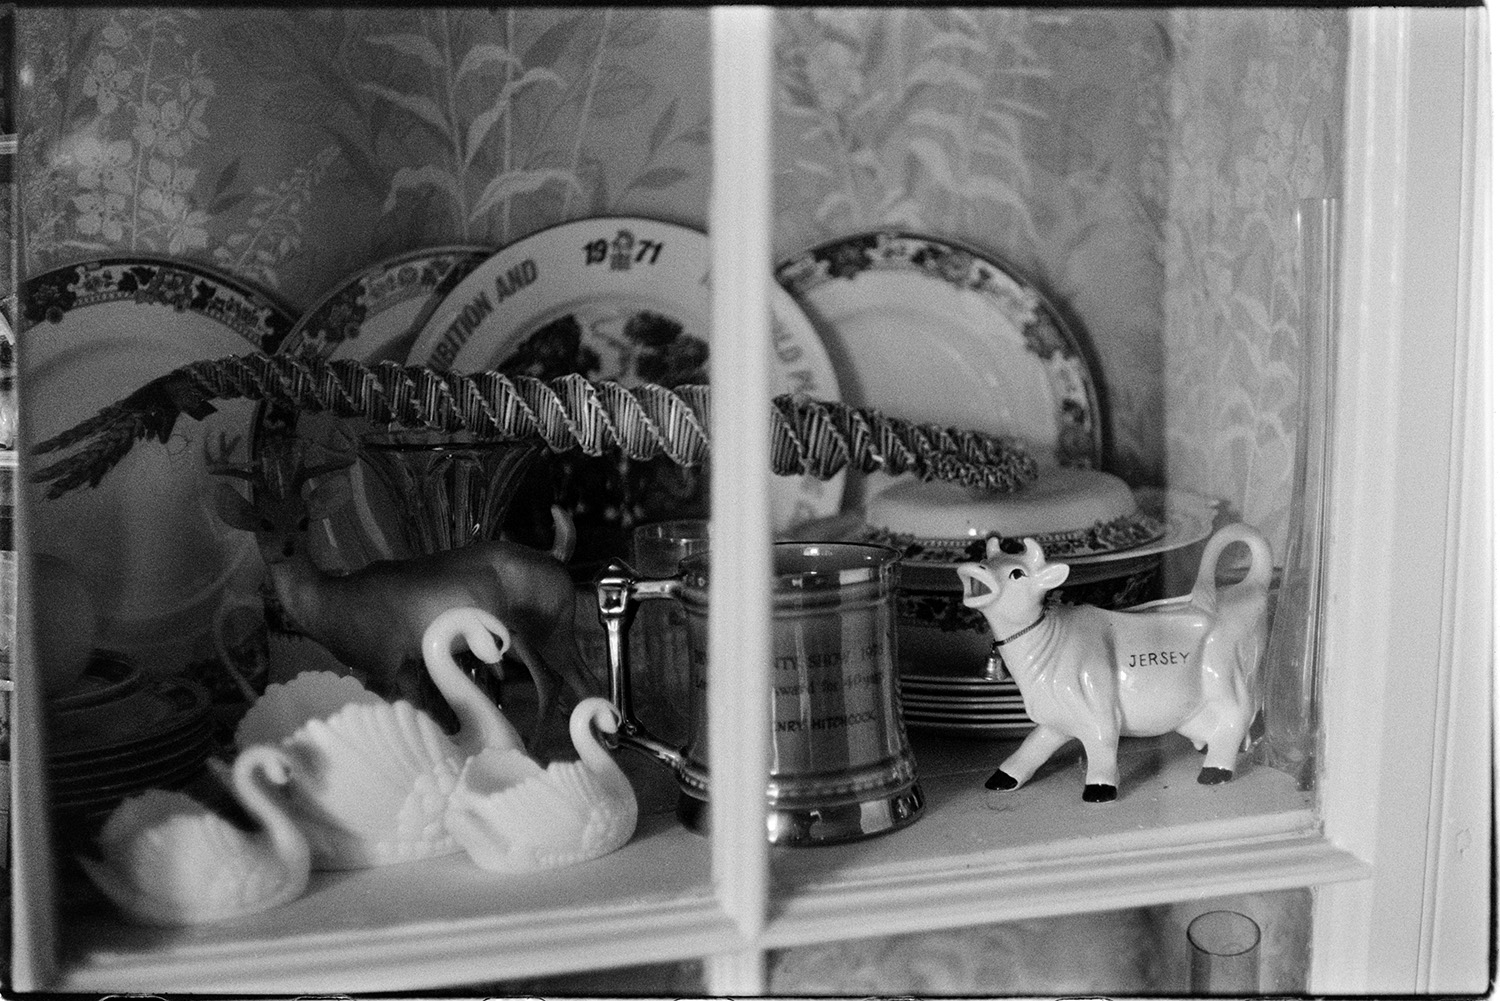 Interior of room with dresser and ornaments, corn dolly. 
[A close up view of china plates, china ornaments, including a cow and swans, and a silver tankard in a dresser. A corn dolly is resting on top of the ornaments.]